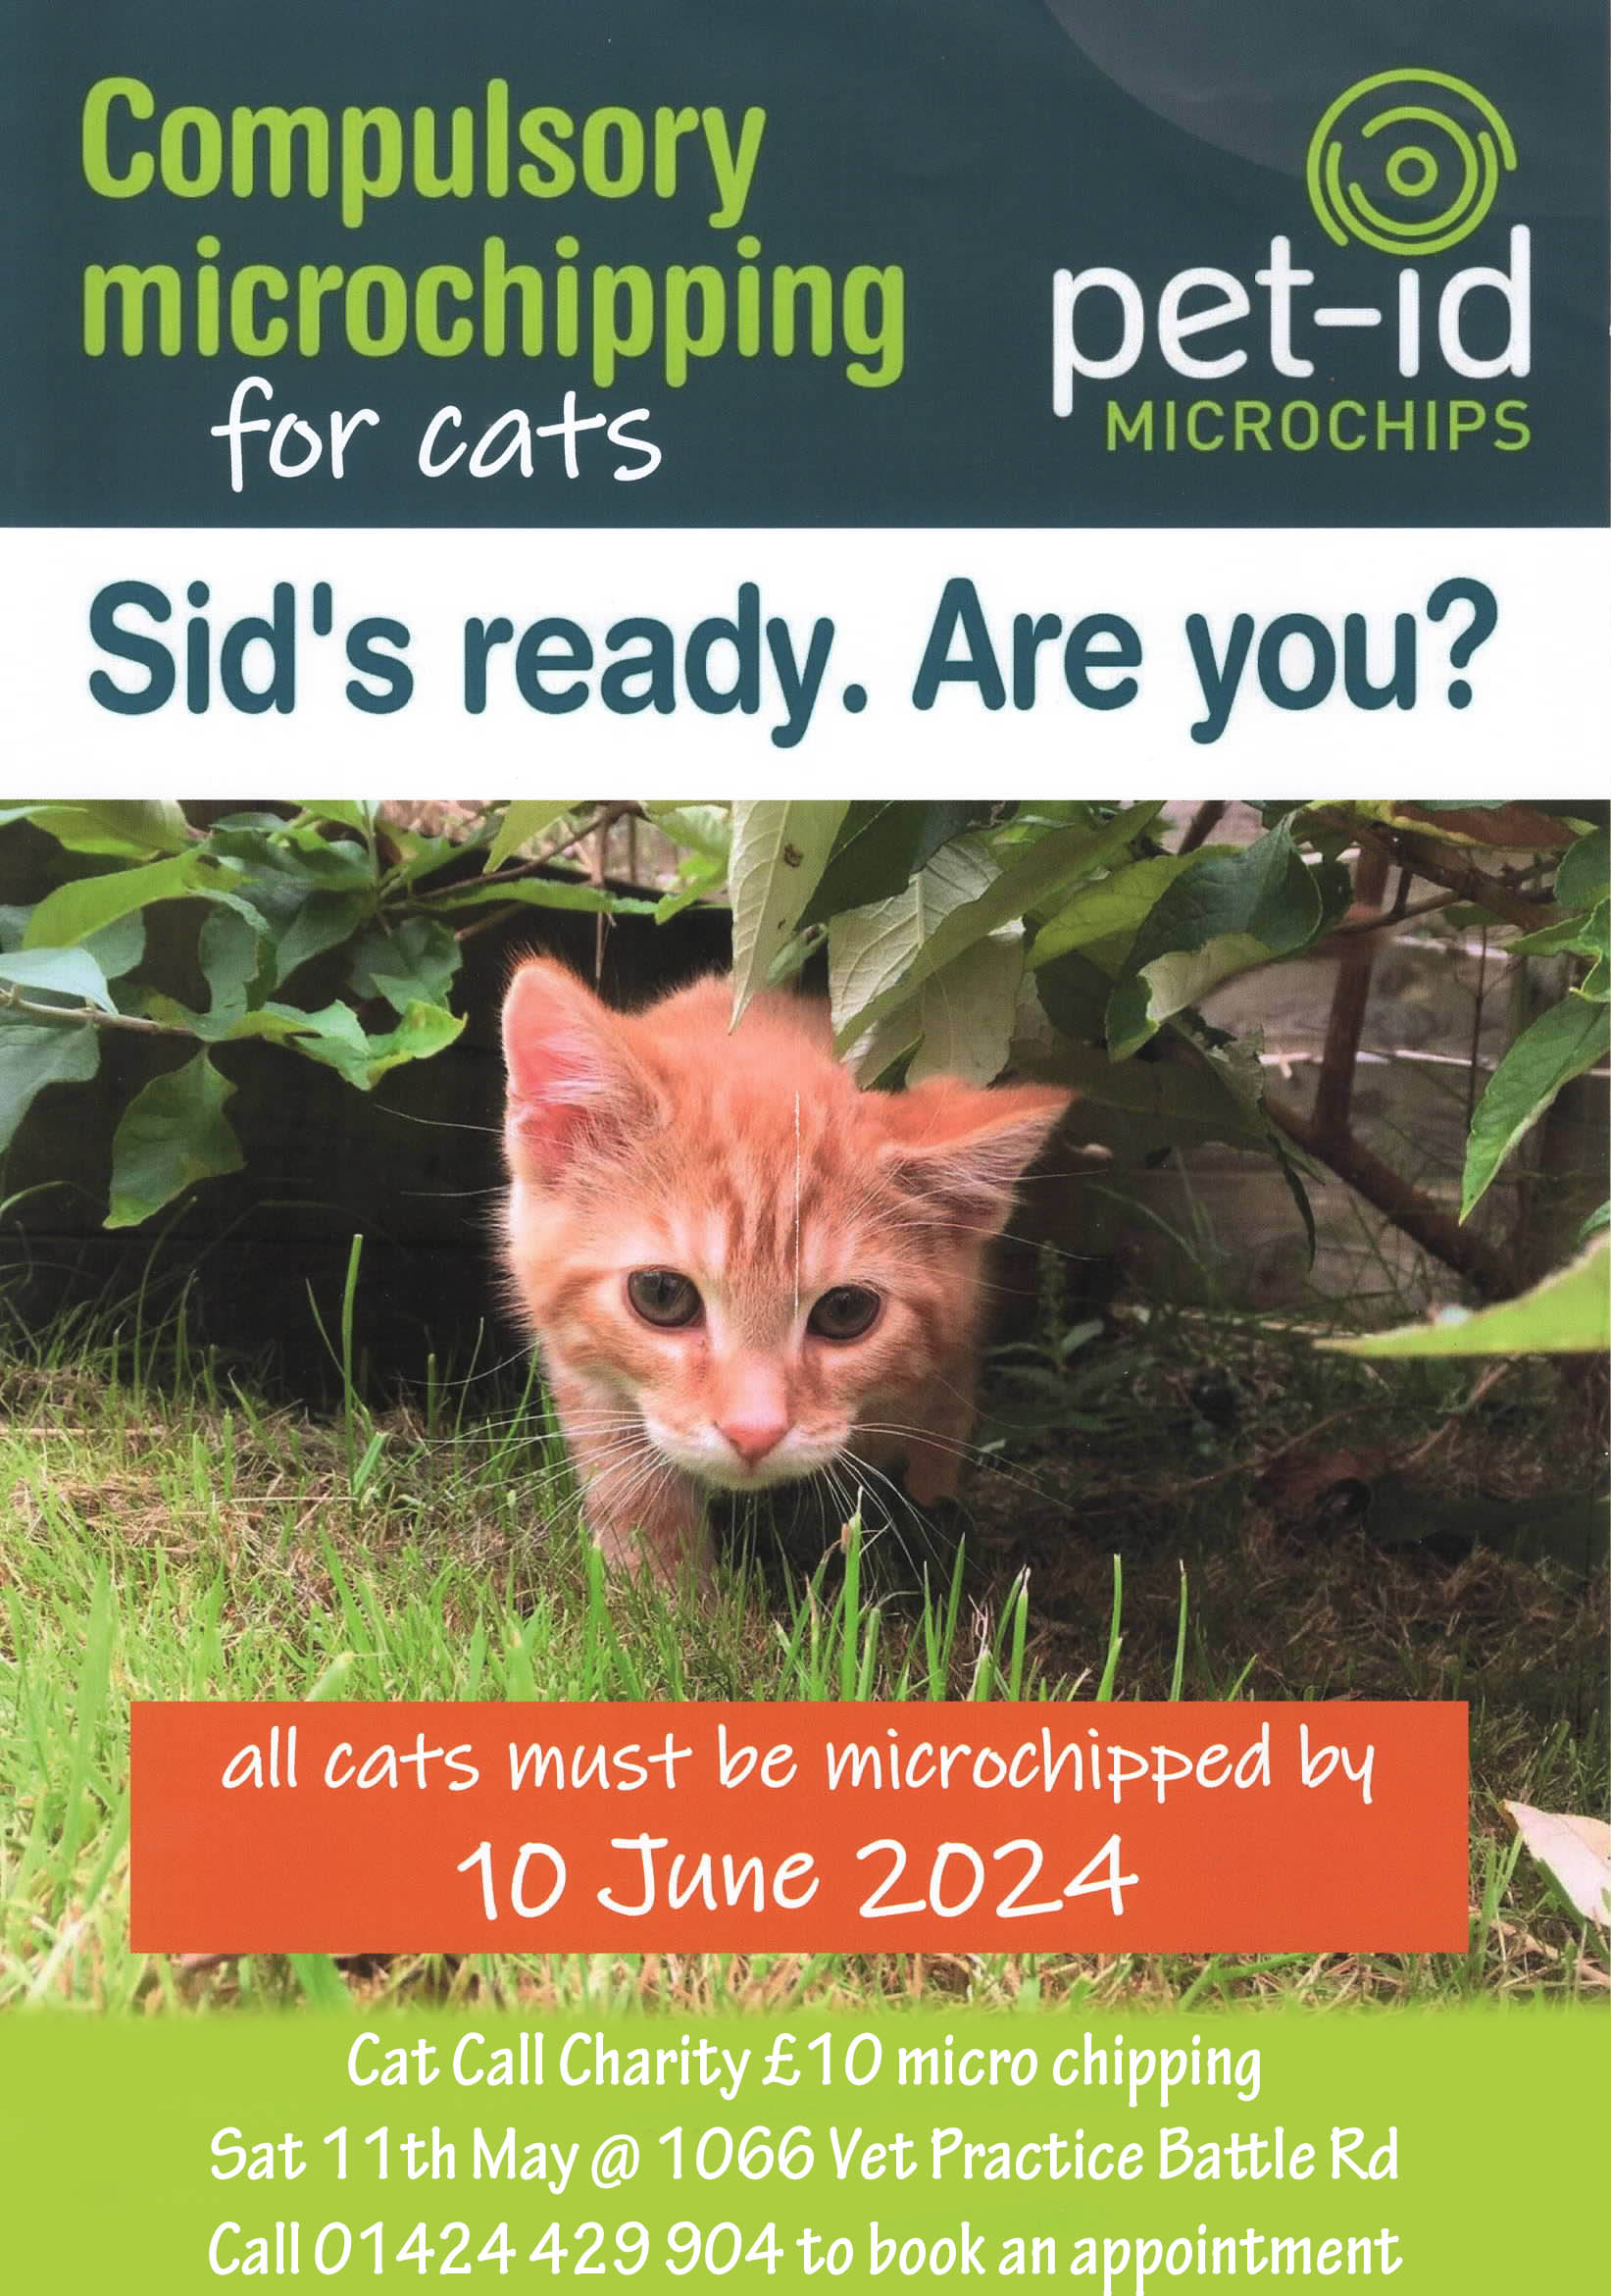 Cat Call charity Cat micro chipping